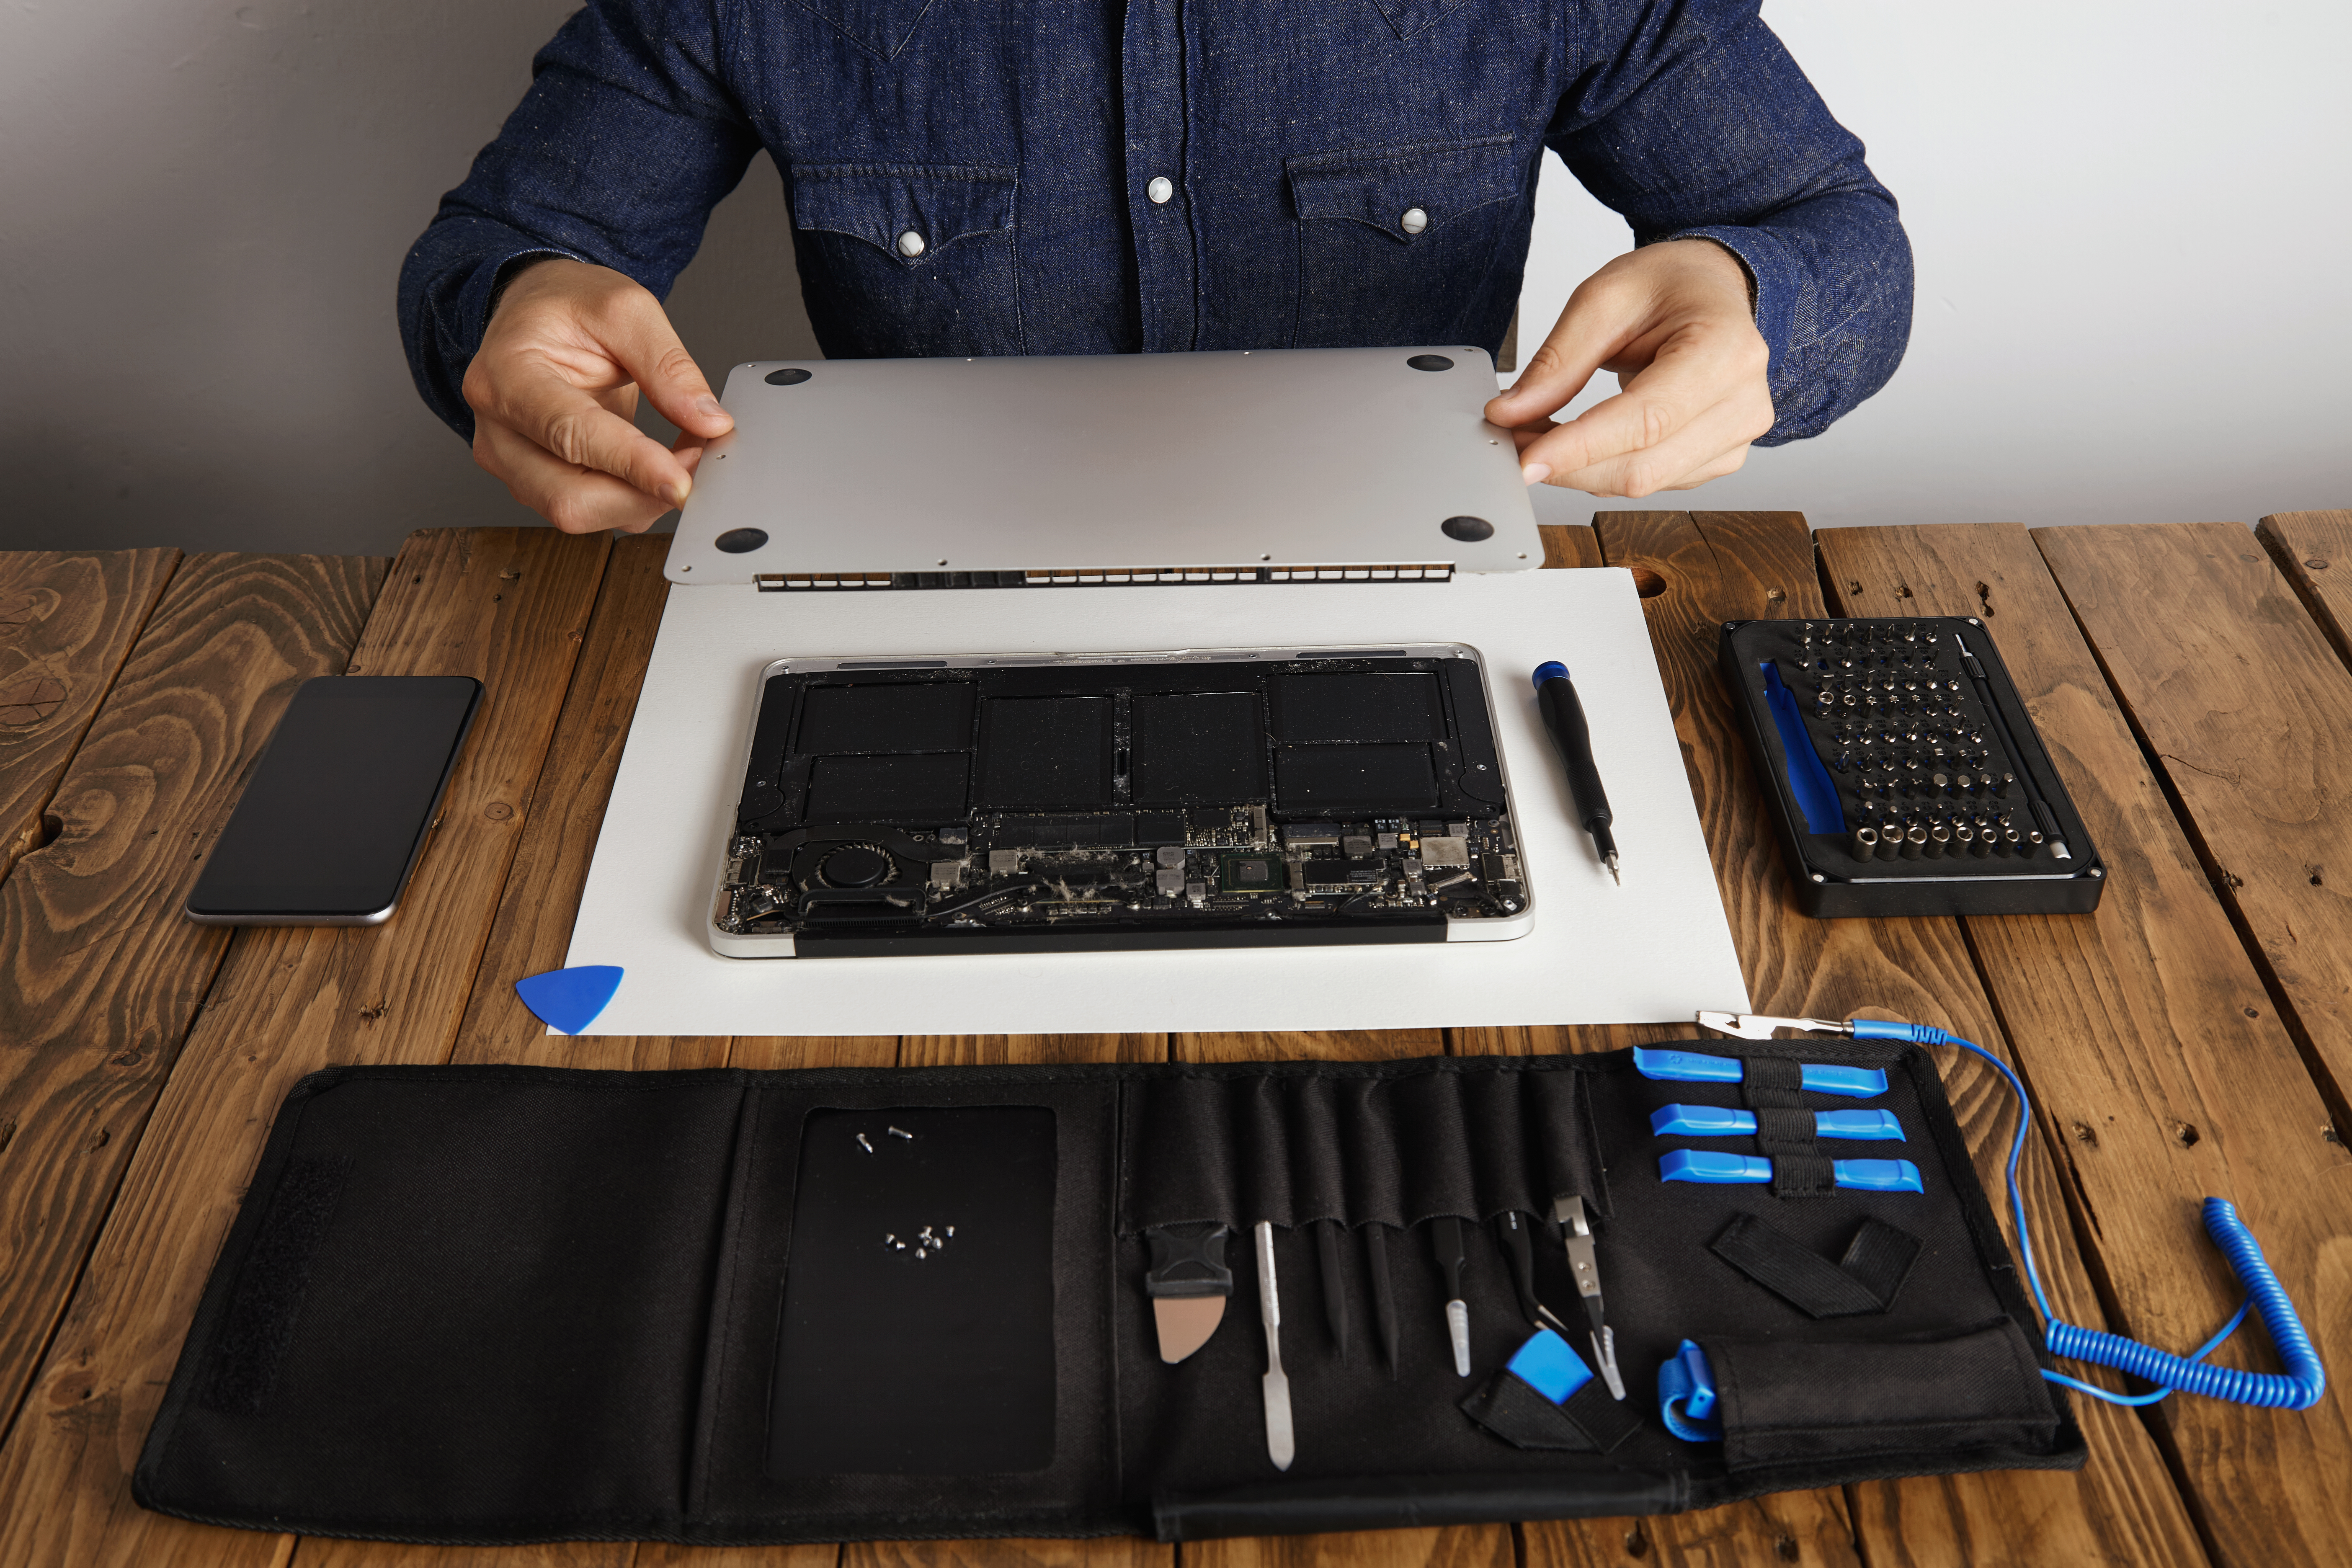 Repairing a Broken MacBook: Is It Worth the Investment or Better to Sell?